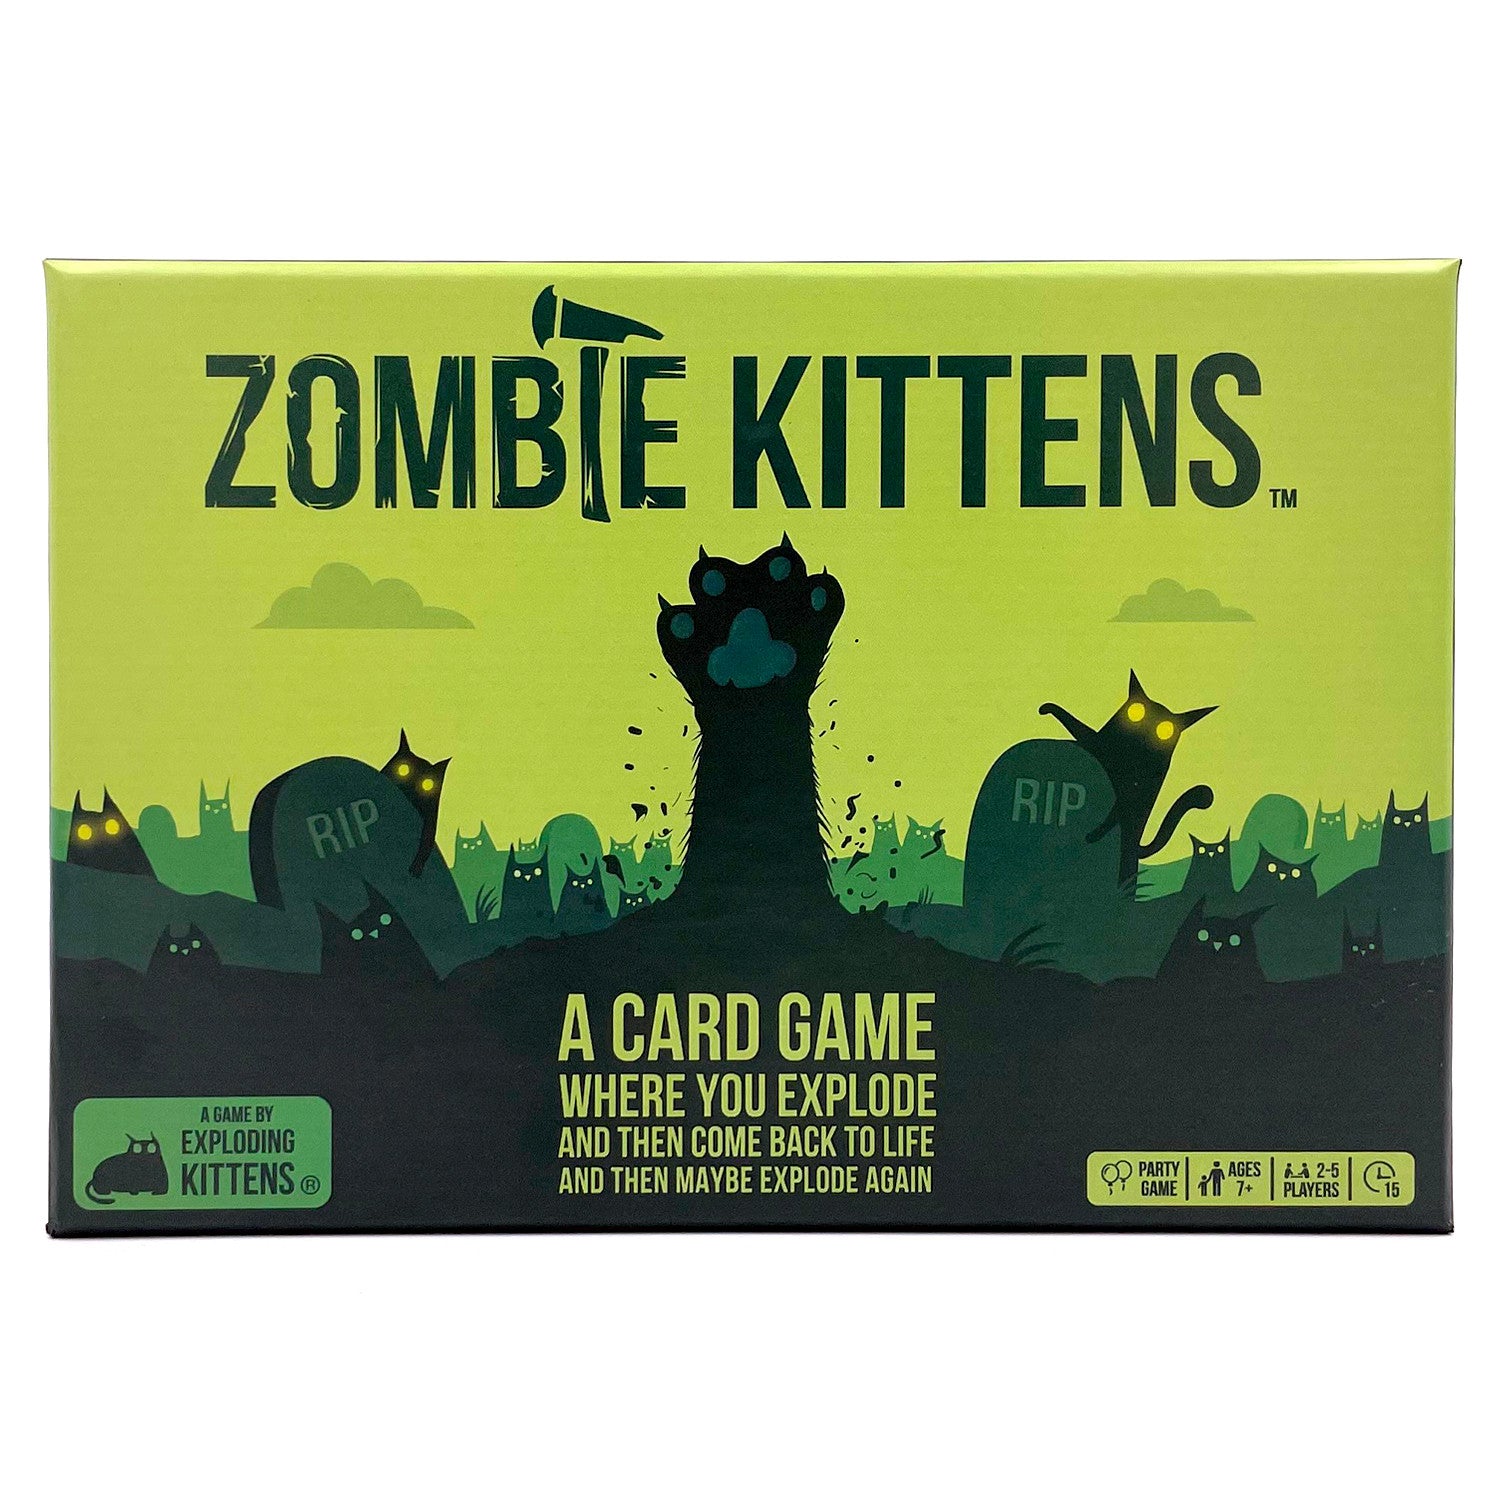 ZOMBIE KITTENS BY EXPLODING KITTENS - Gifts R Us